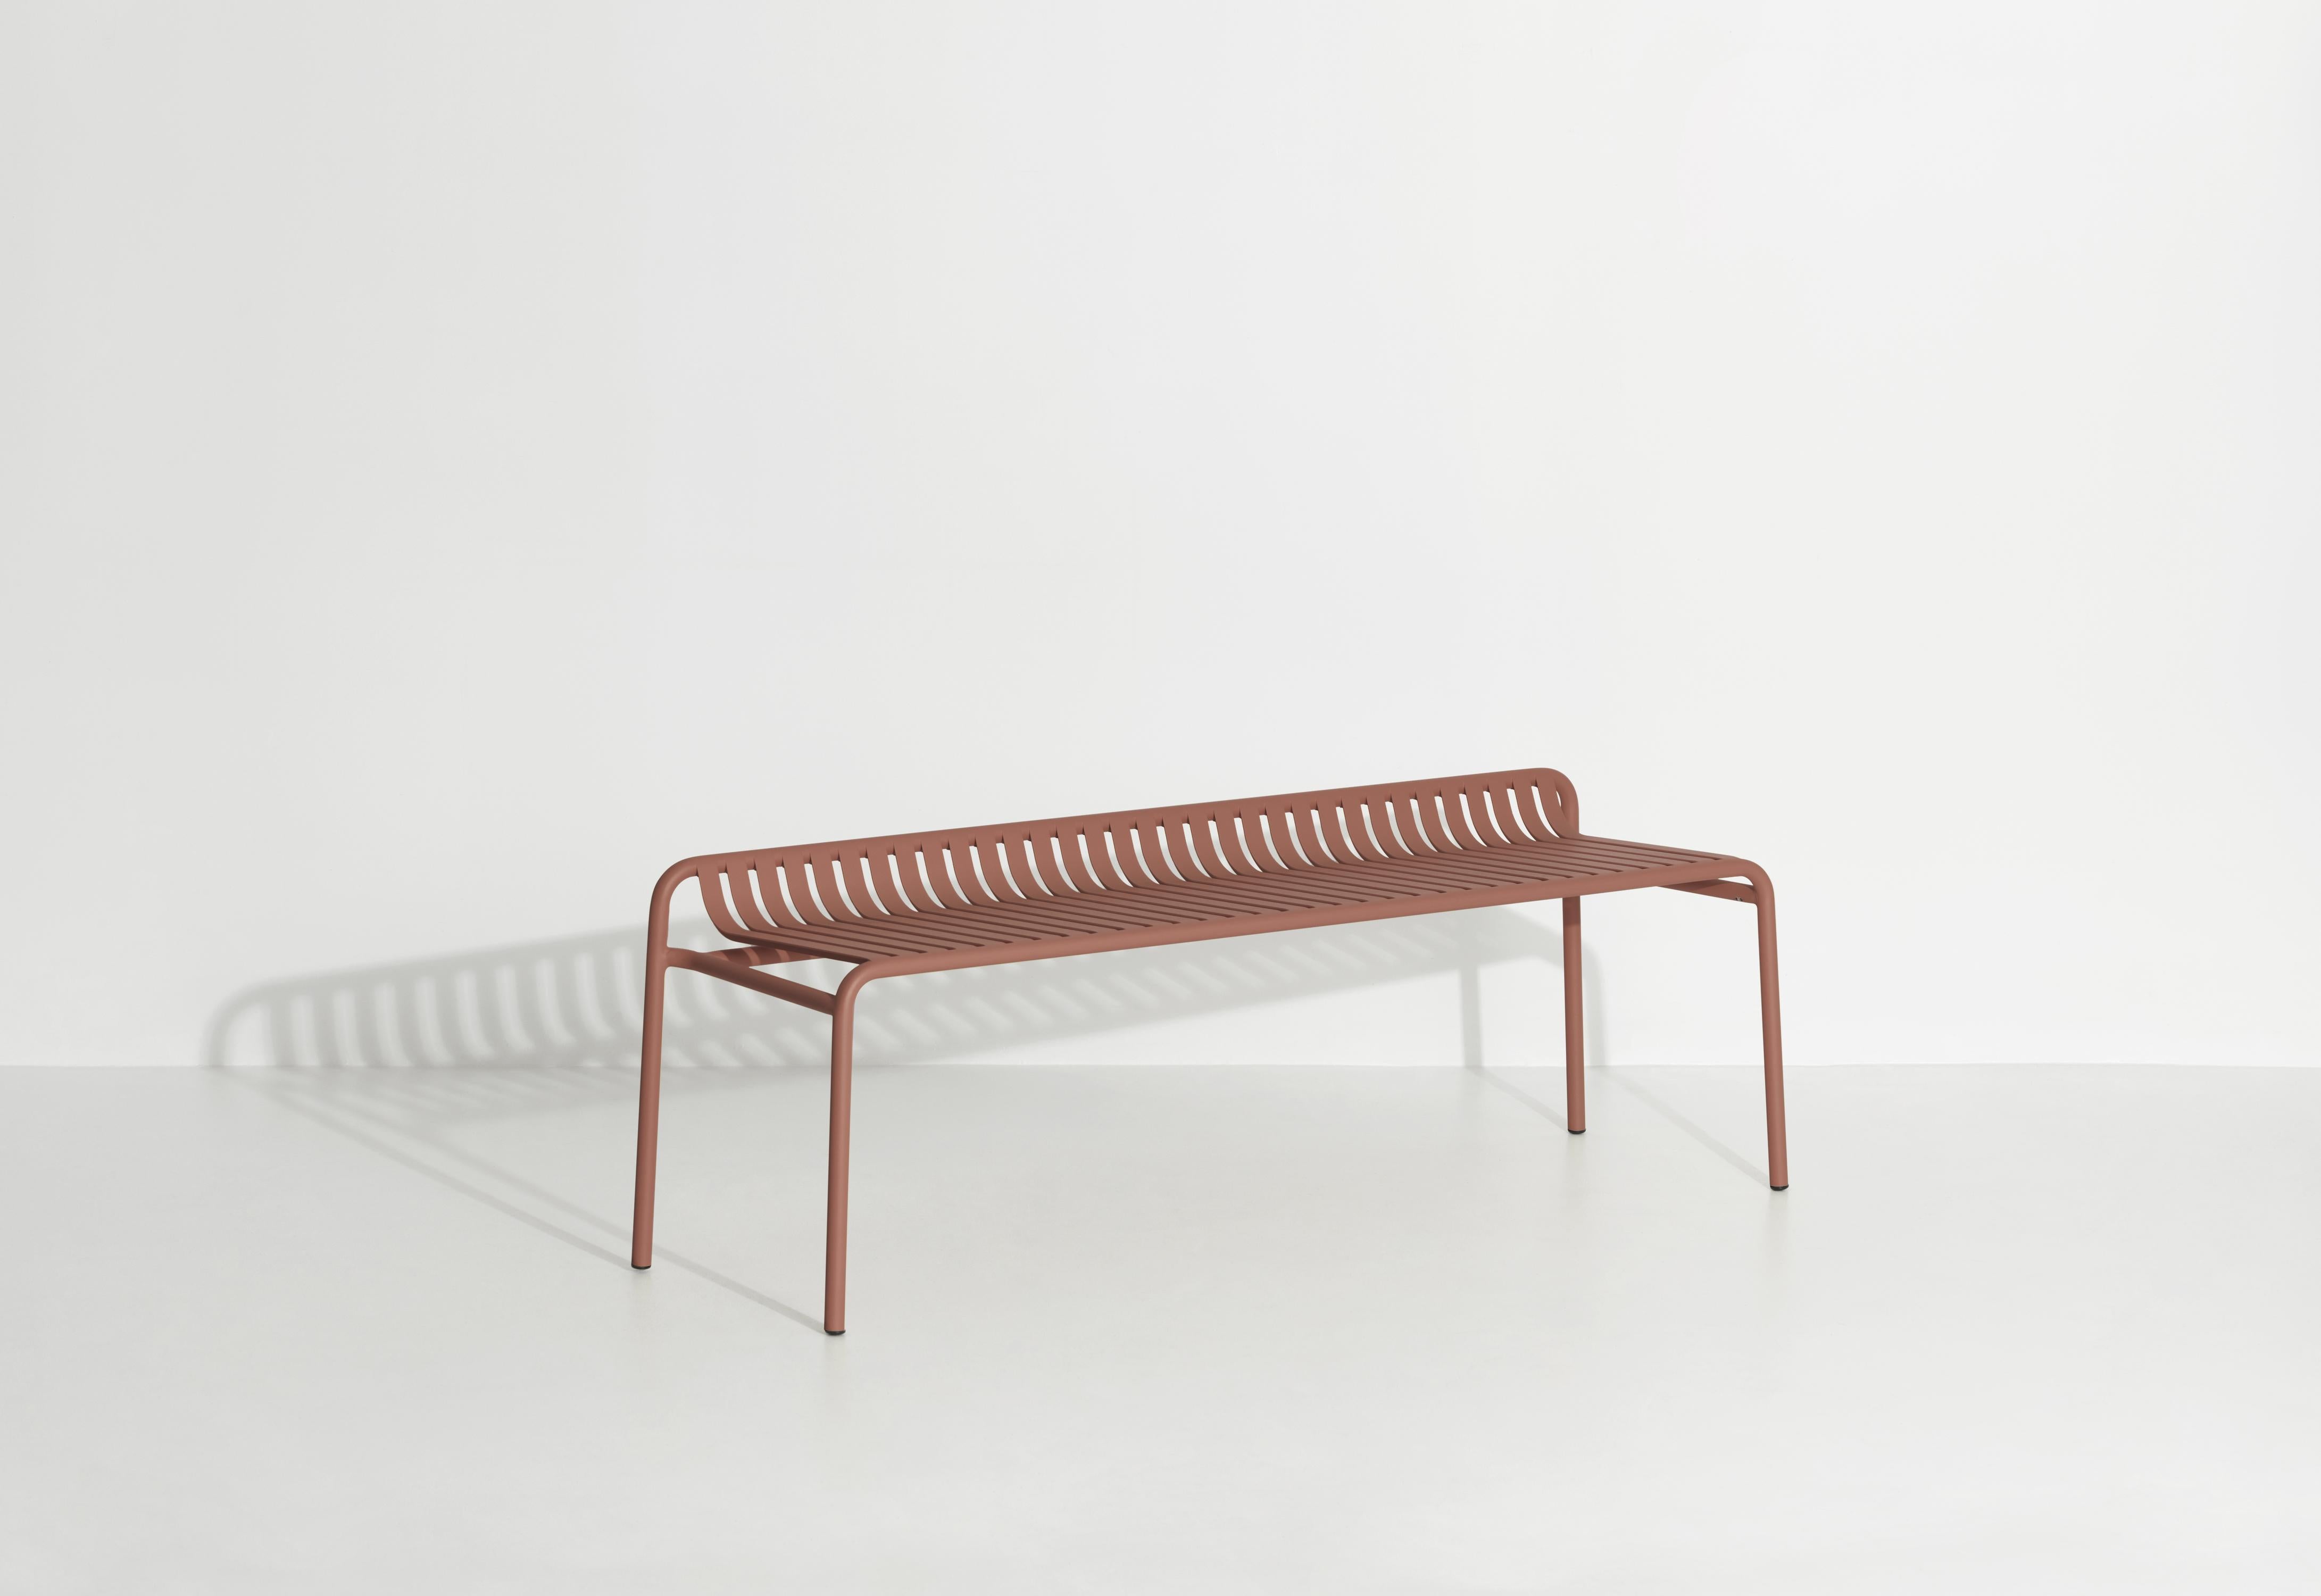 Petite Friture Week-End Bench without Back in Terracotta Aluminium by Studio BrichetZiegler, 2017

The week-end collection is a full range of outdoor furniture, in aluminium grained epoxy paint, matt finish, that includes 18 functions and 8